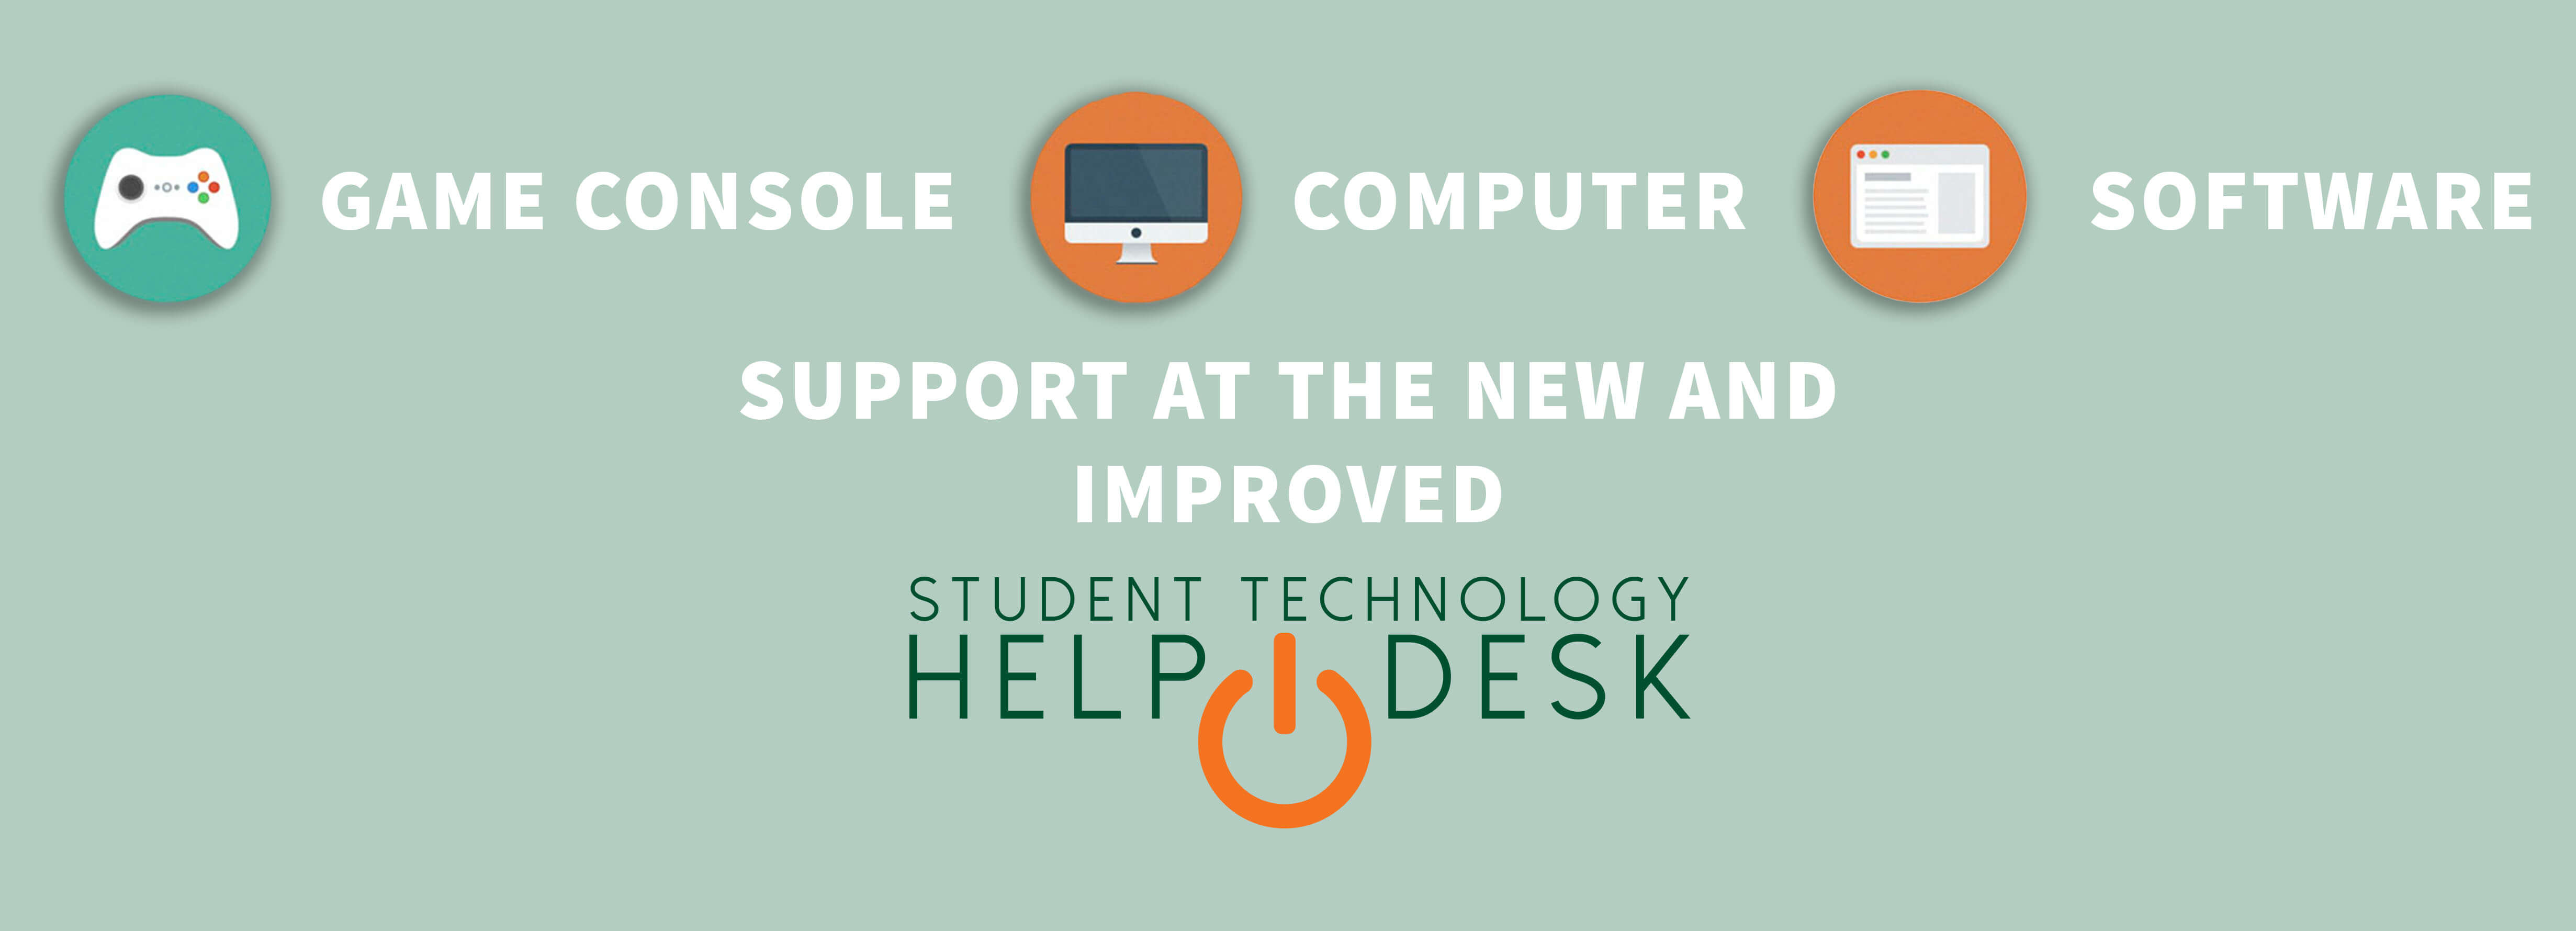 University Of Miami Information Technology – Student Support Intended For University Of Miami Powerpoint Template